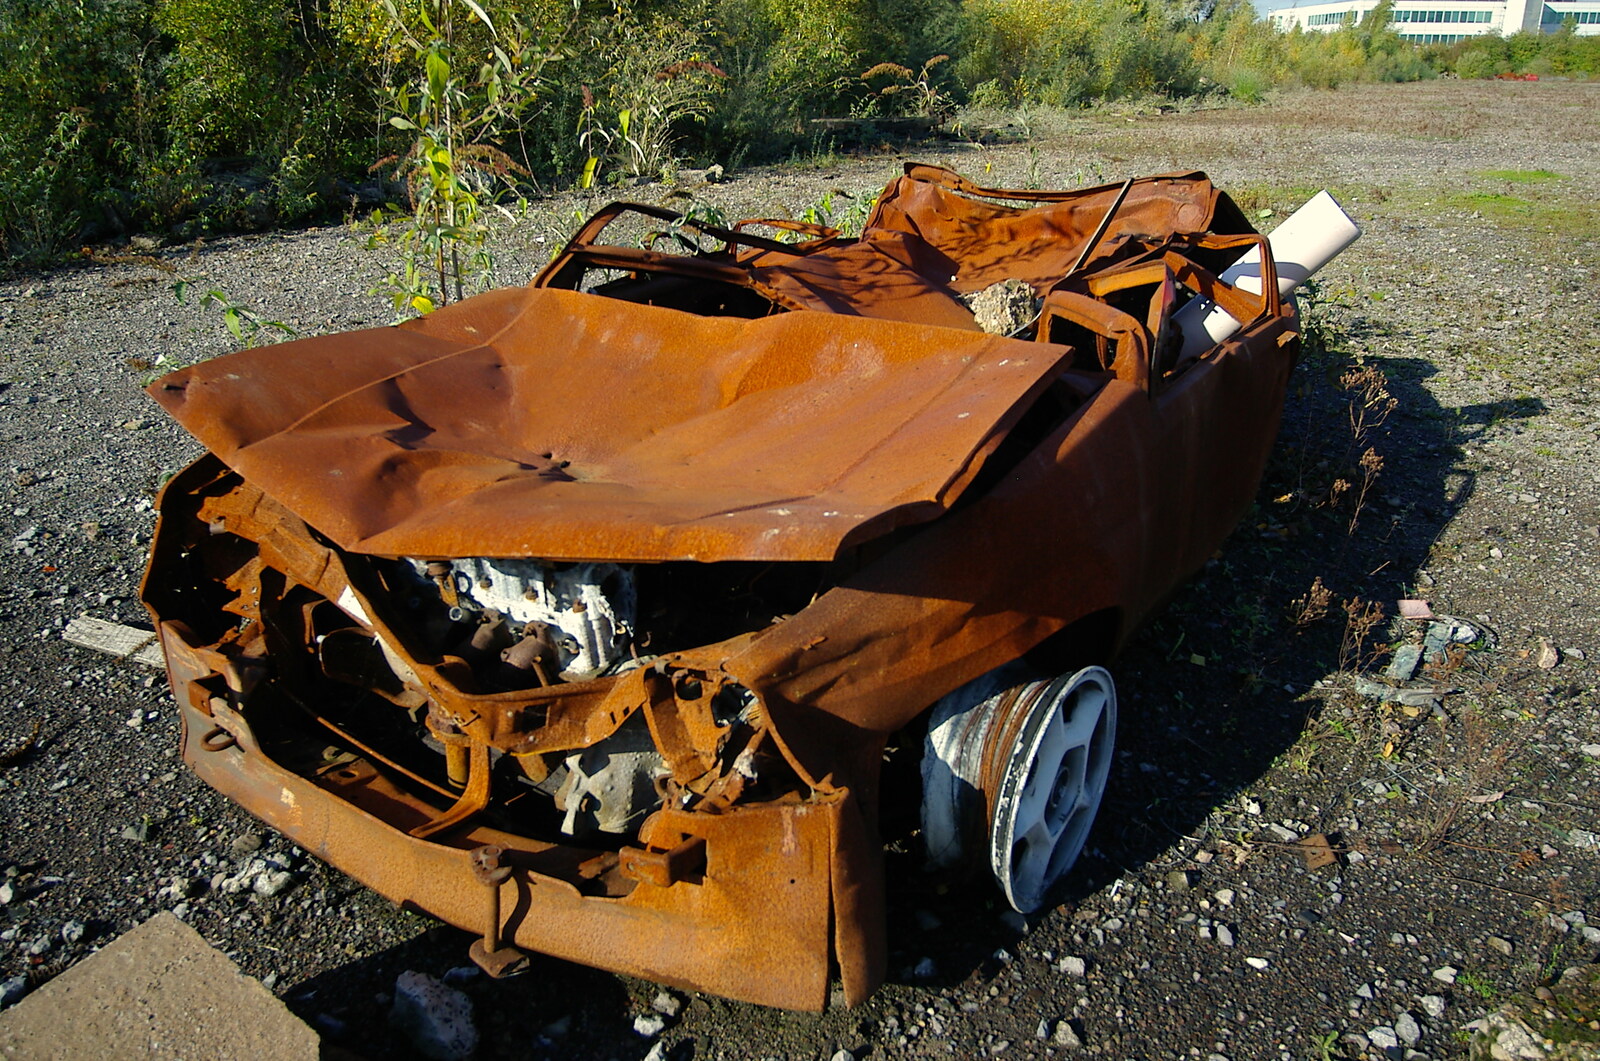 Another burned-out car from Disused Cambridge Railway, Milton Road, Cambridge - 28th October 2005